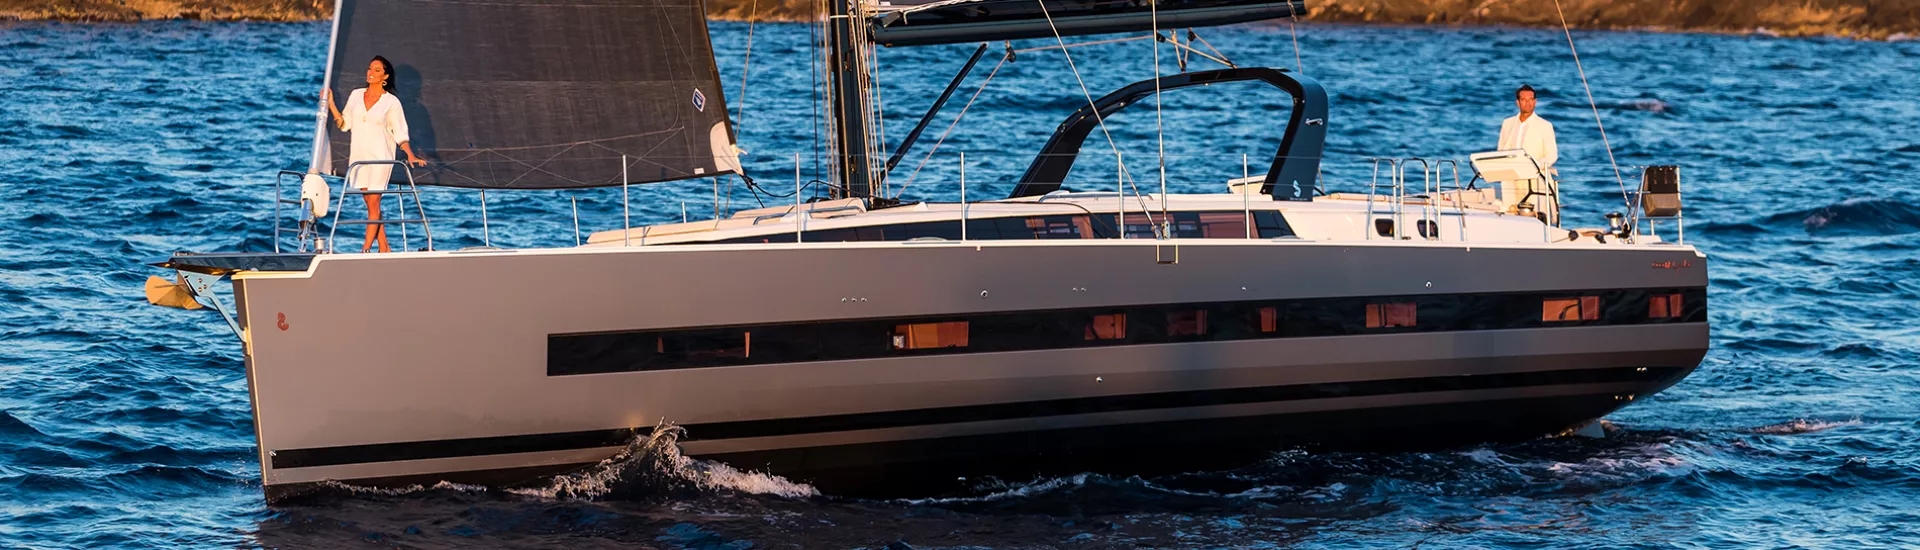 oceanis yacht 62 review